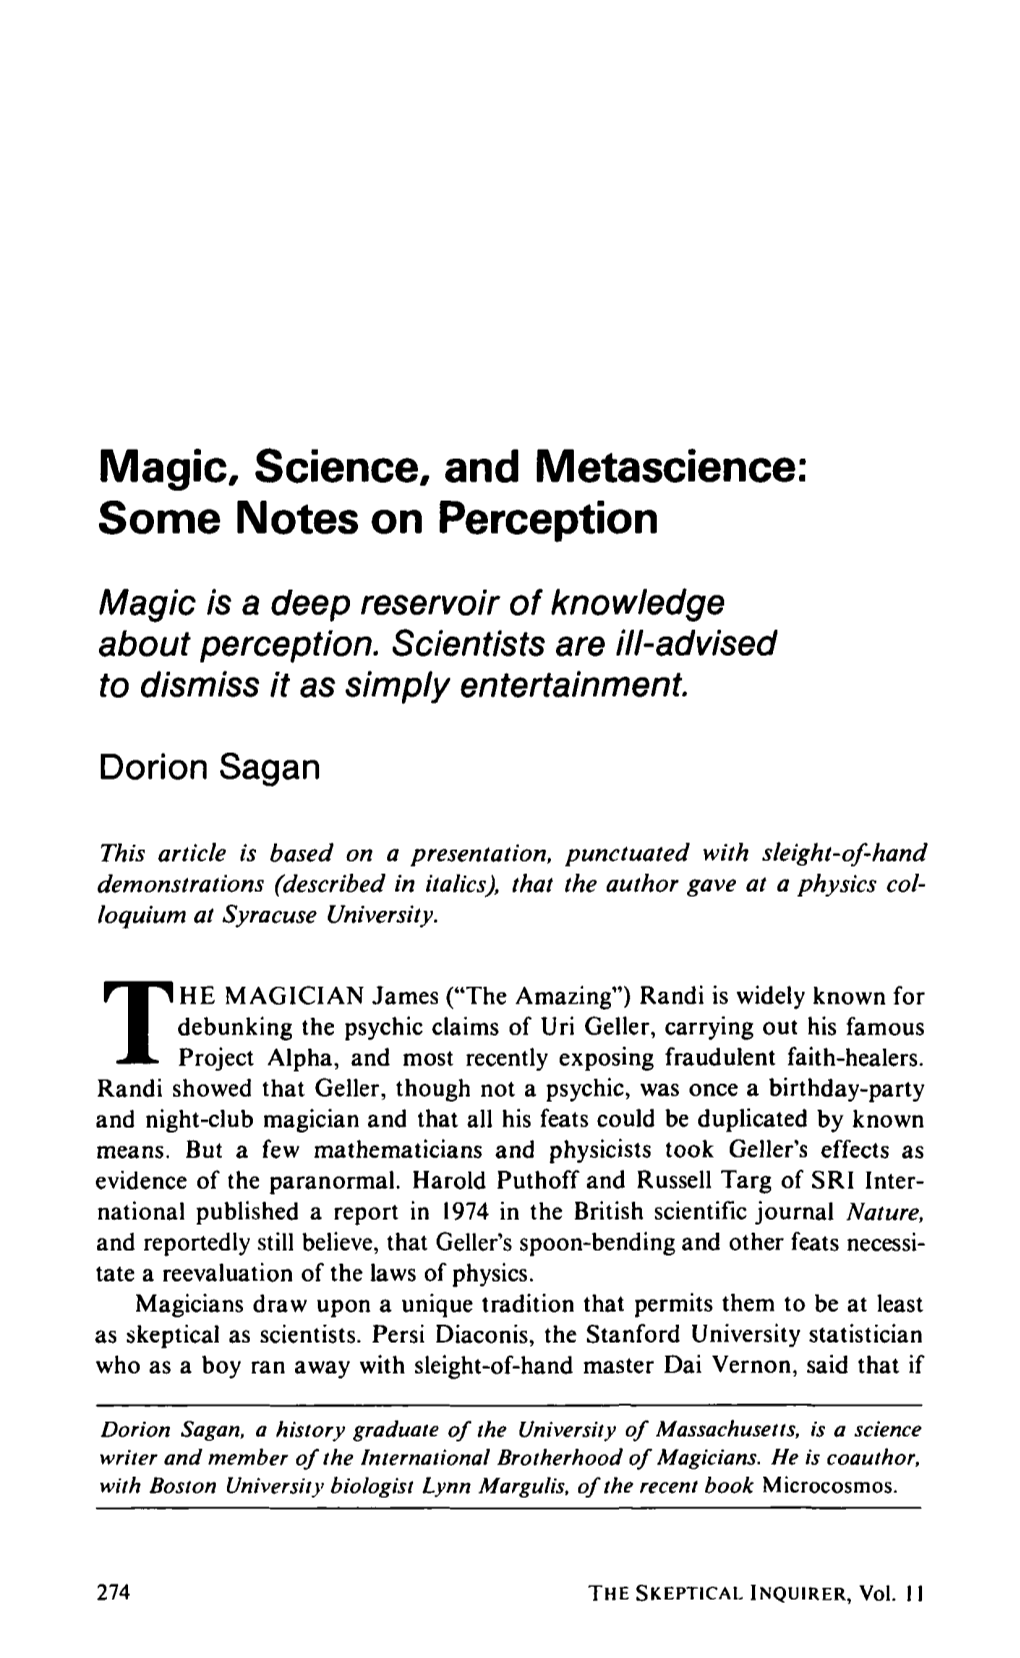 Magic, Science, and Metascience: Some Notes on Perception